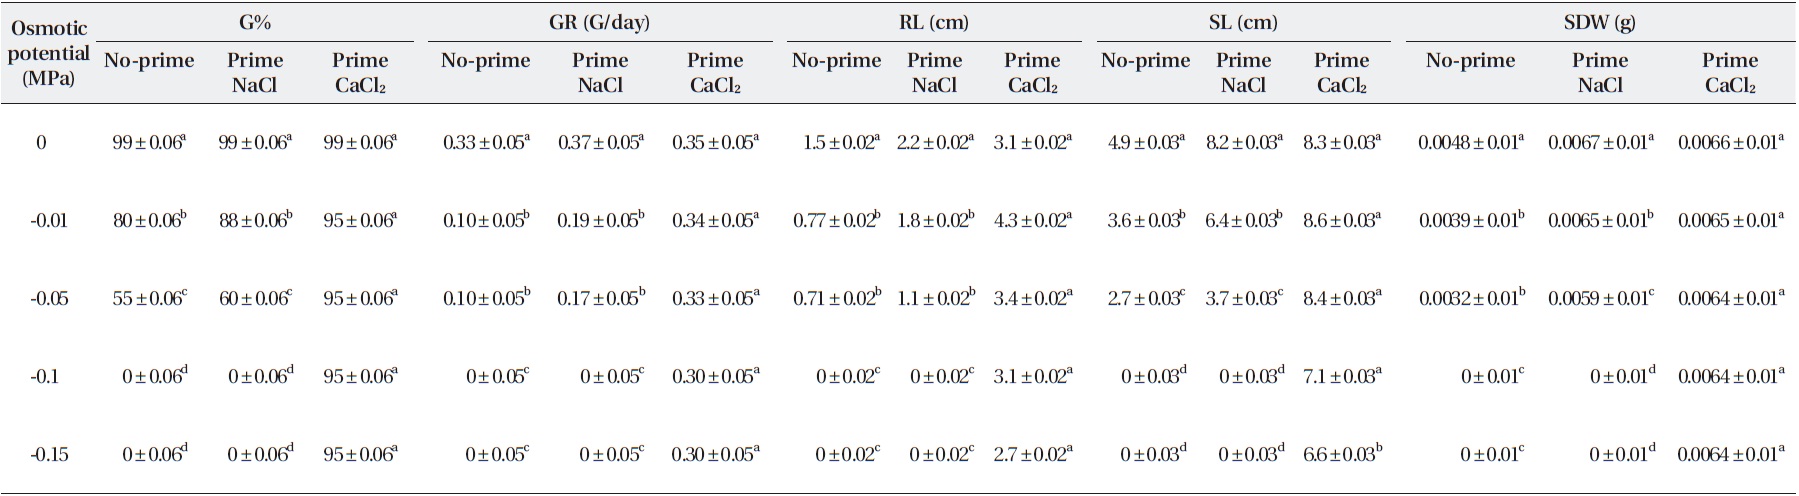 Comparison of mean characteristics during seed germination in saline prime-NaCl and prime CaCl2 conditions